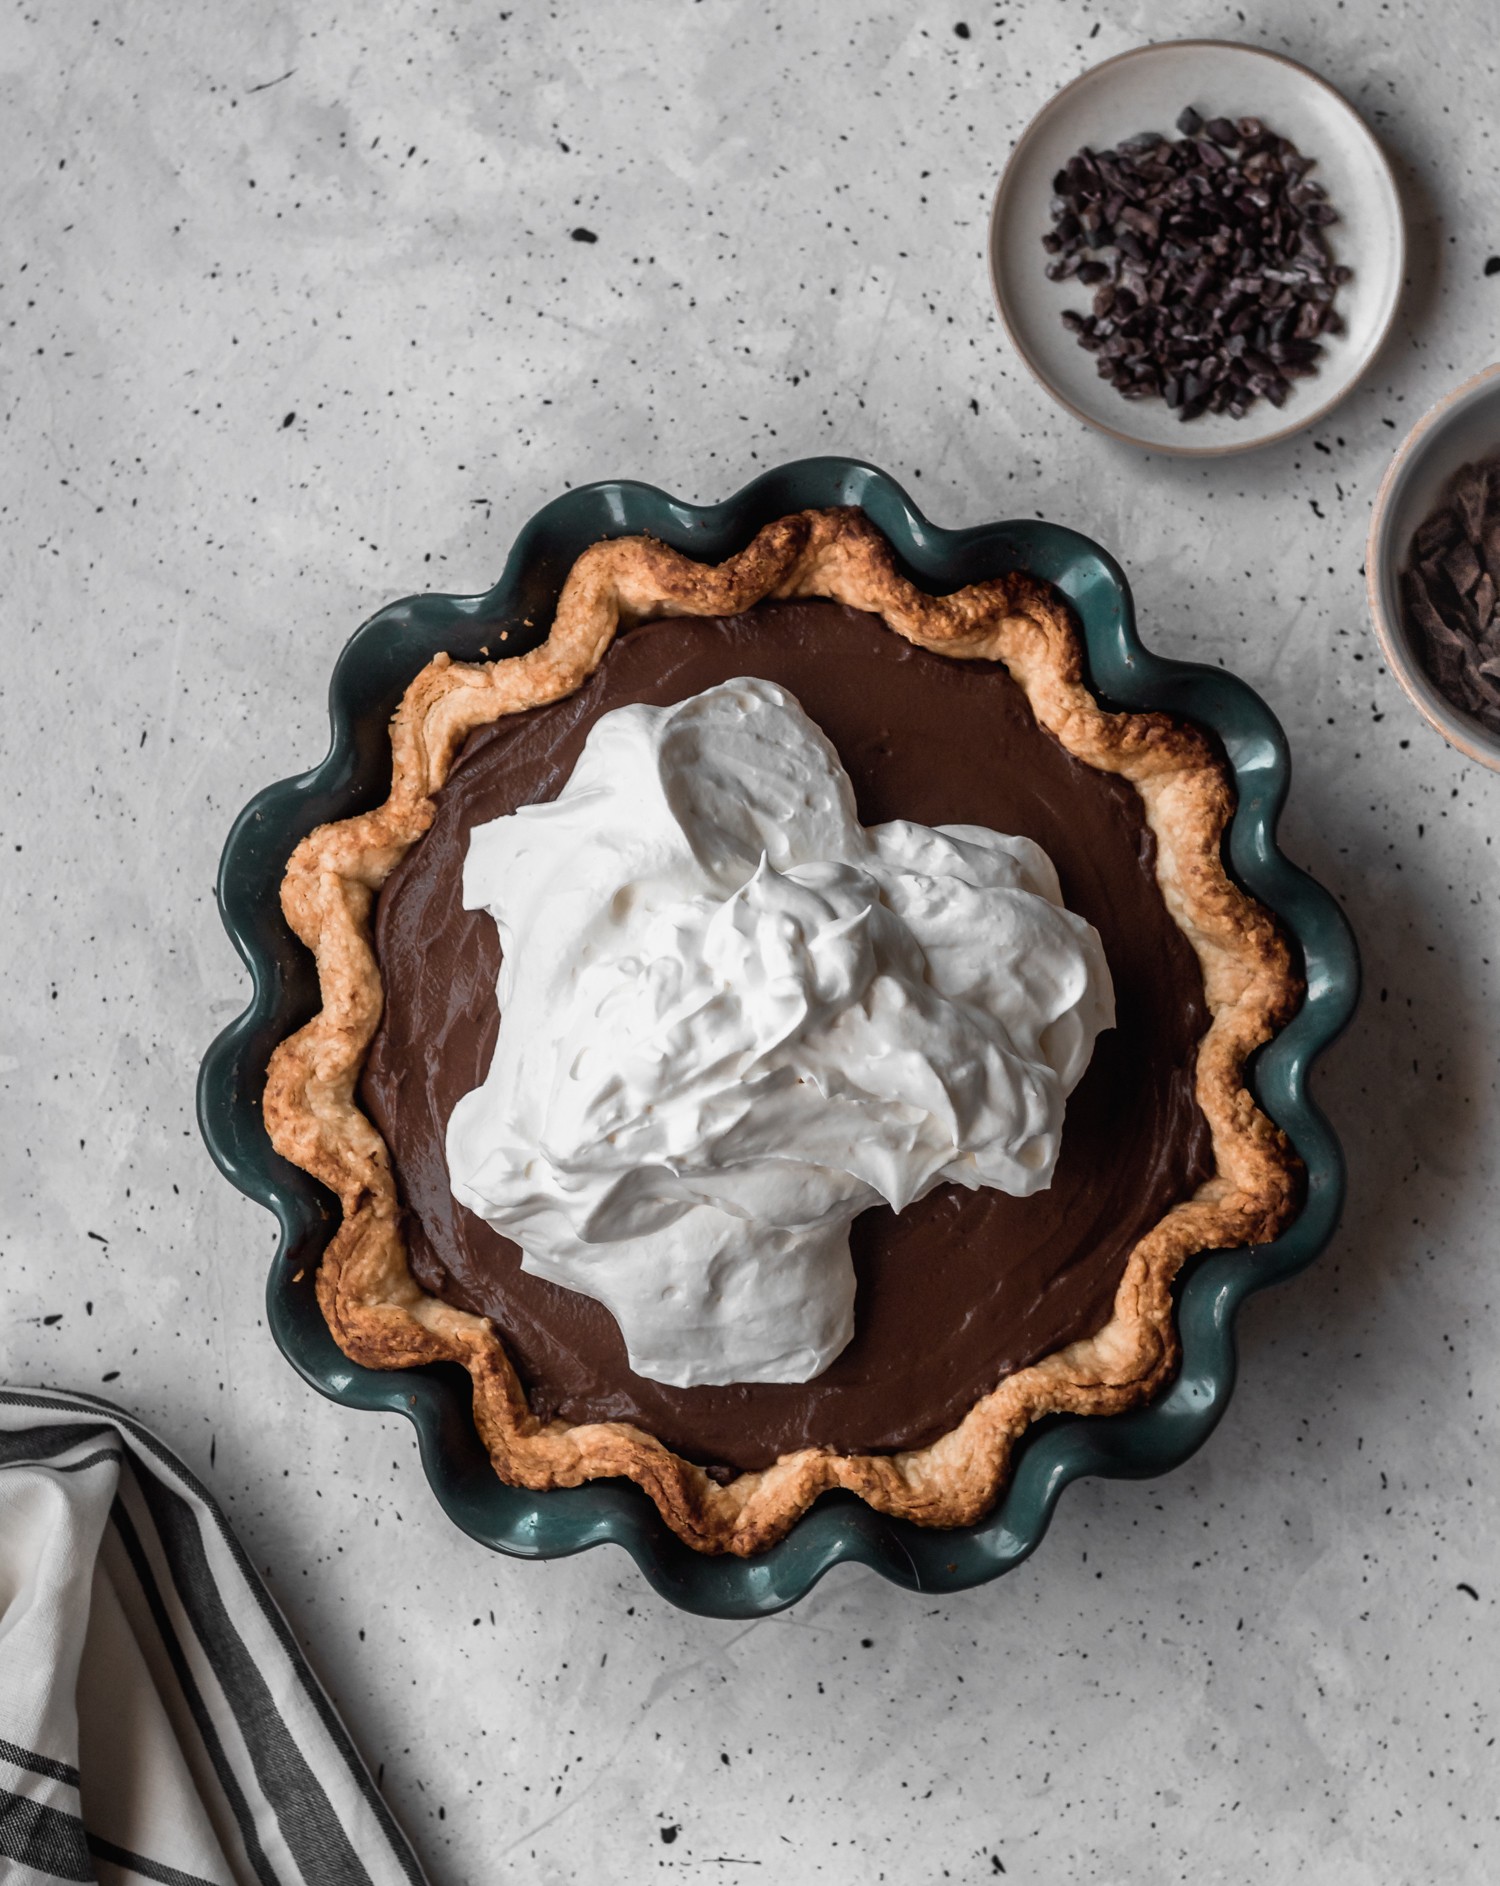 An overhead image of a cocoa tart in a dark teal pie plate topped with a large dollop of whipped cream on a grey table next to a dish of cacao nibs.